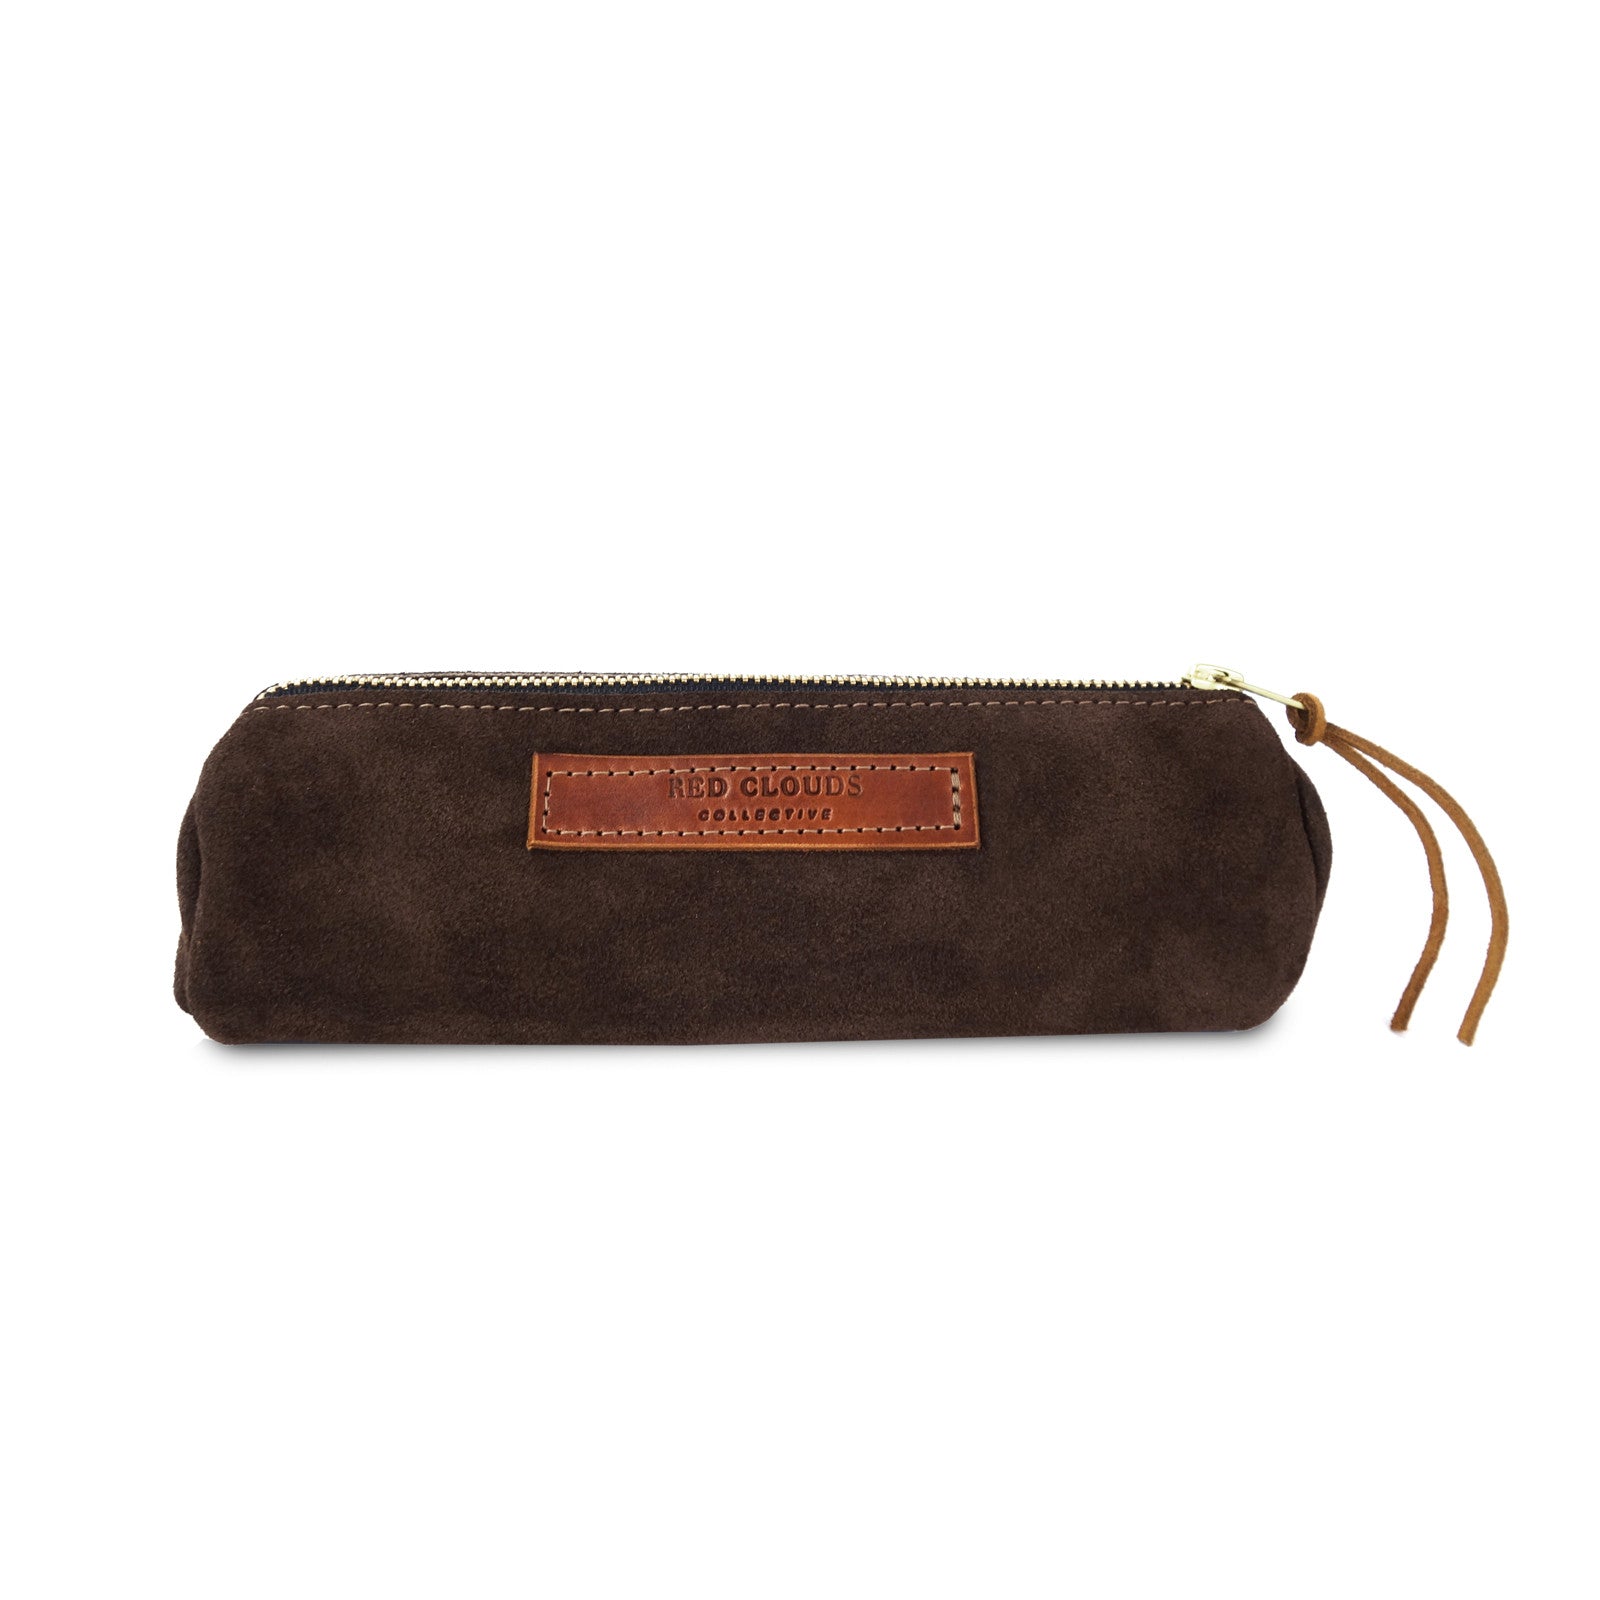 Round Pencil Case - Brown - Red Clouds Collective - Made in the USA